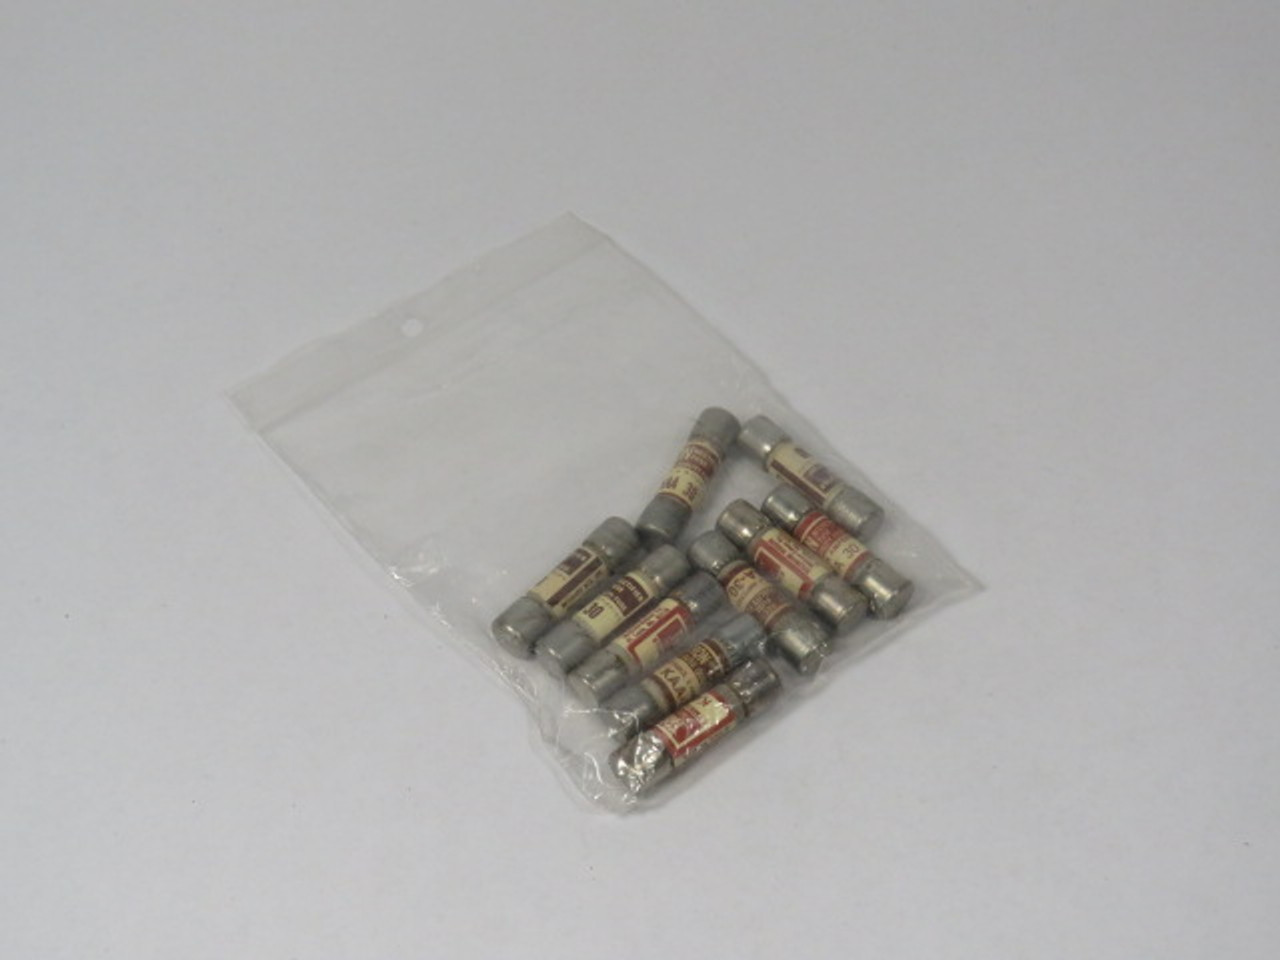 Tron KAA-30 Rectifier Fuse 30A 130V Lot of 10 USED